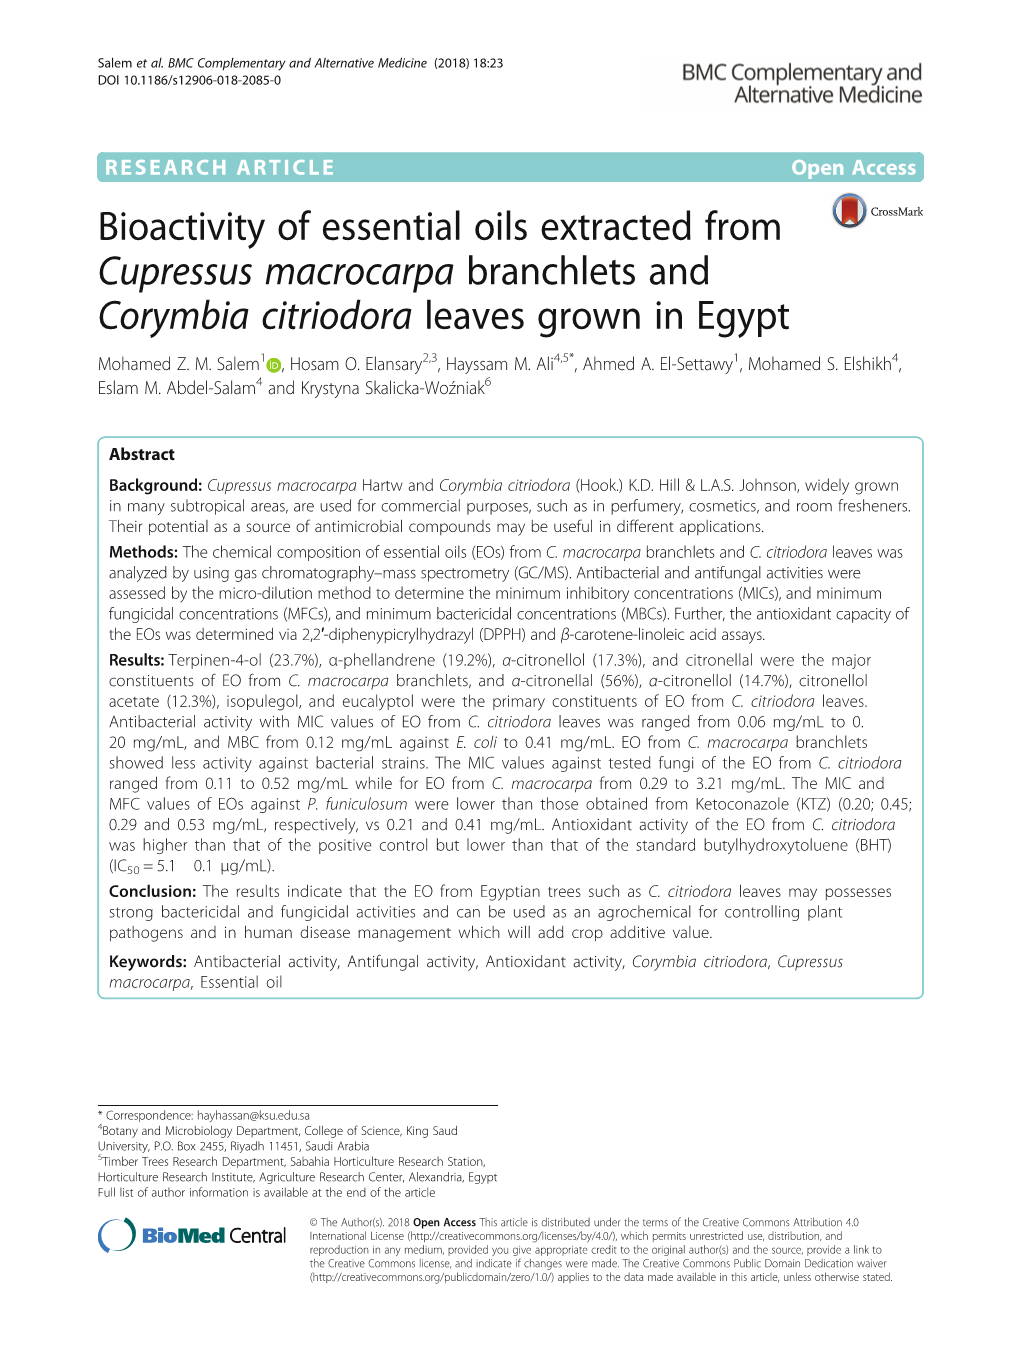 Bioactivity of Essential Oils Extracted from Cupressus Macrocarpa Branchlets and Corymbia Citriodora Leaves Grown in Egypt Mohamed Z